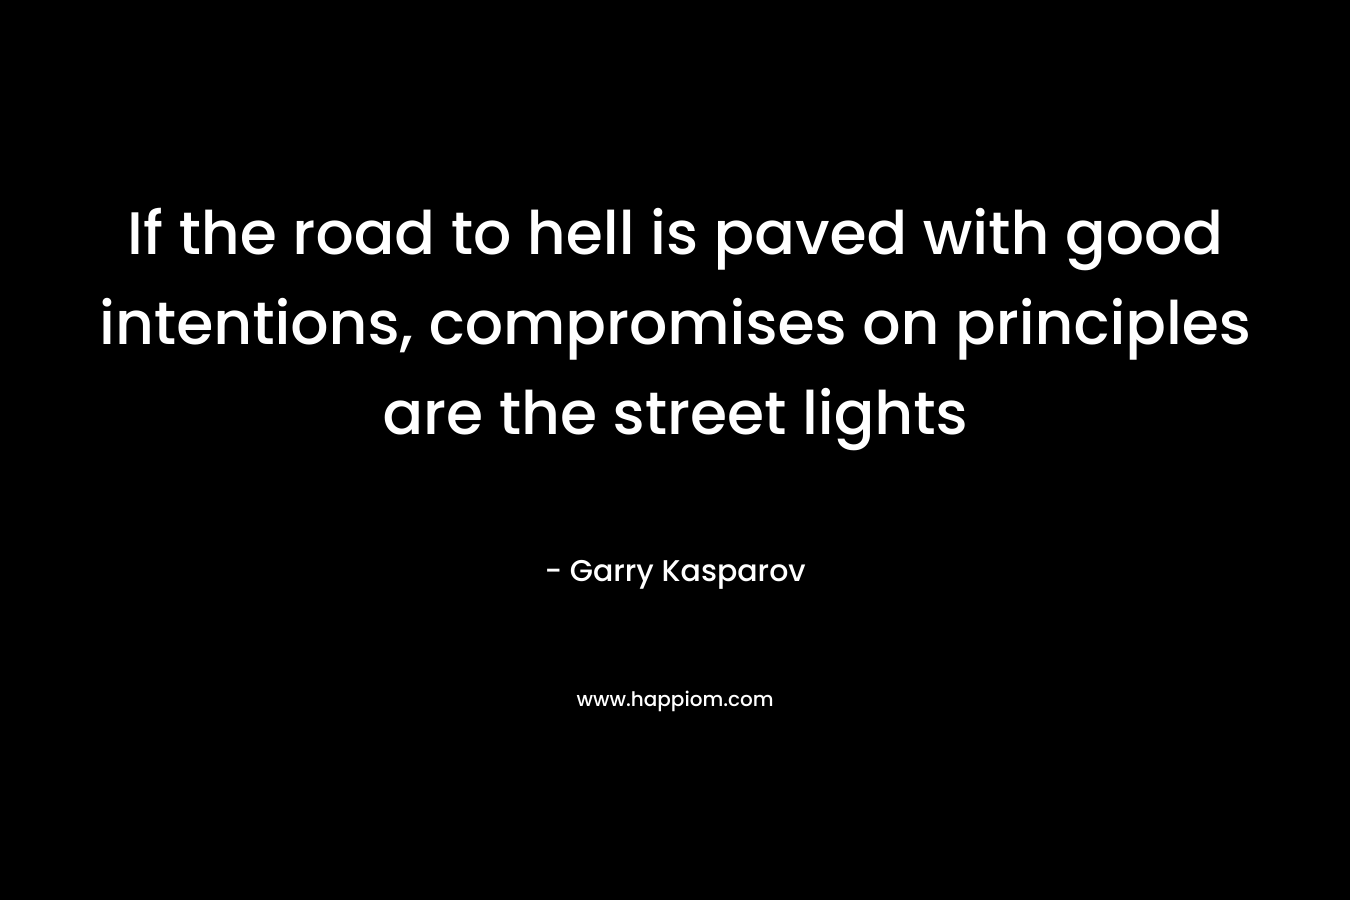 If the road to hell is paved with good intentions, compromises on principles are the street lights